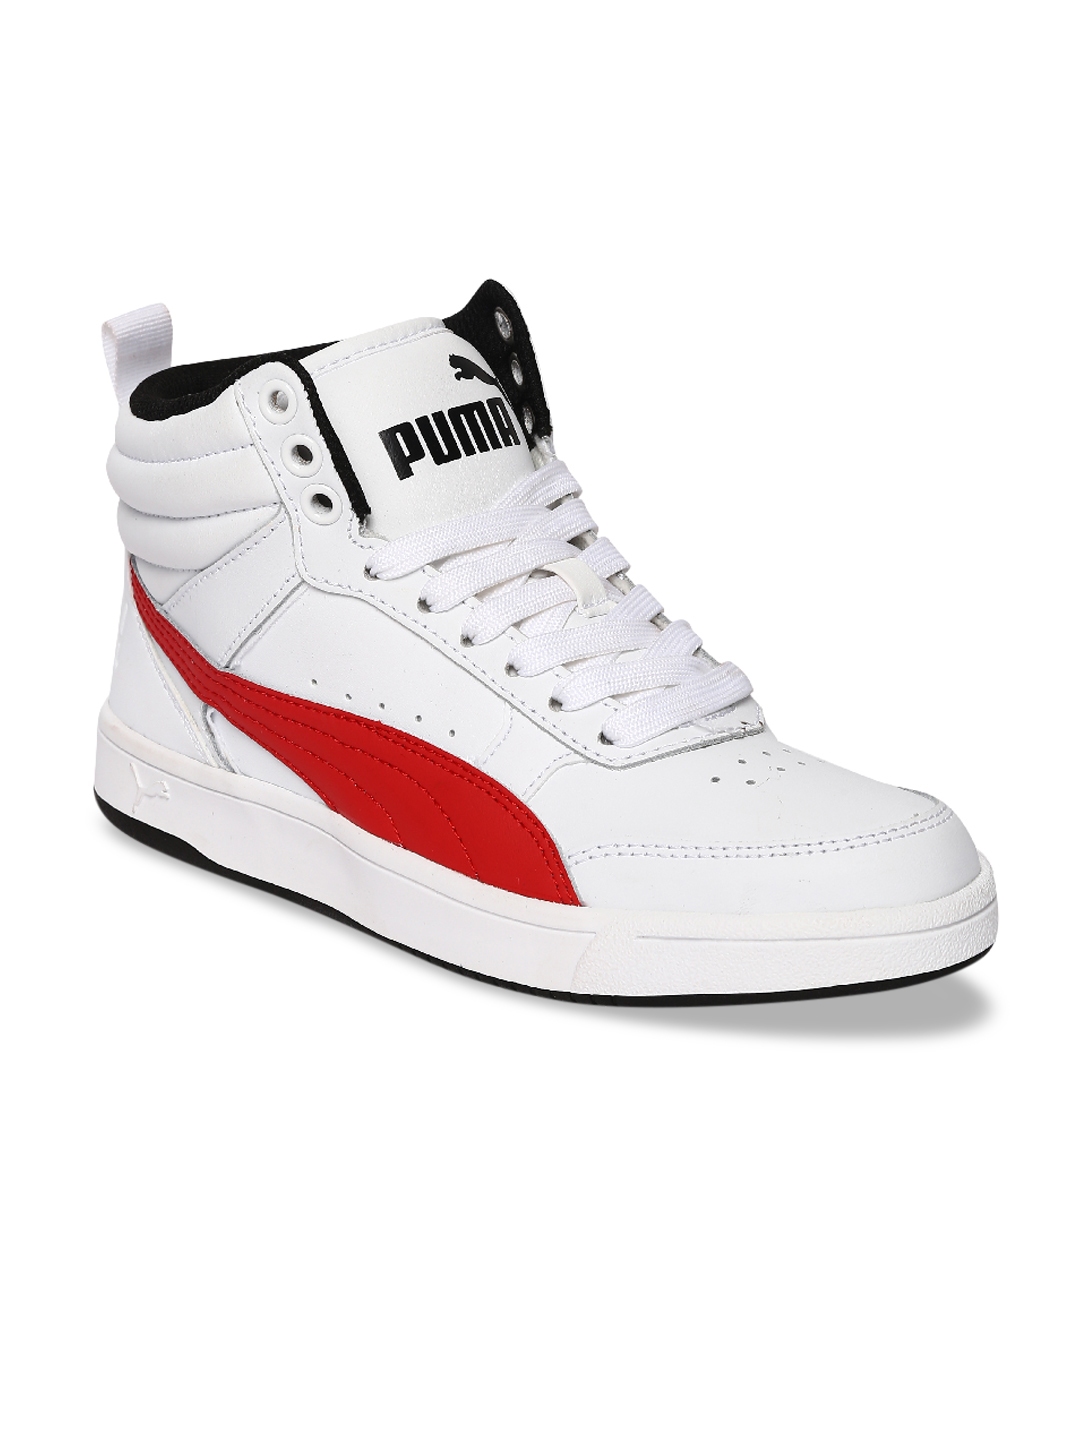 Buy Puma Boys White Colourblocked Leather Mid Top Sneakers - Casual ...